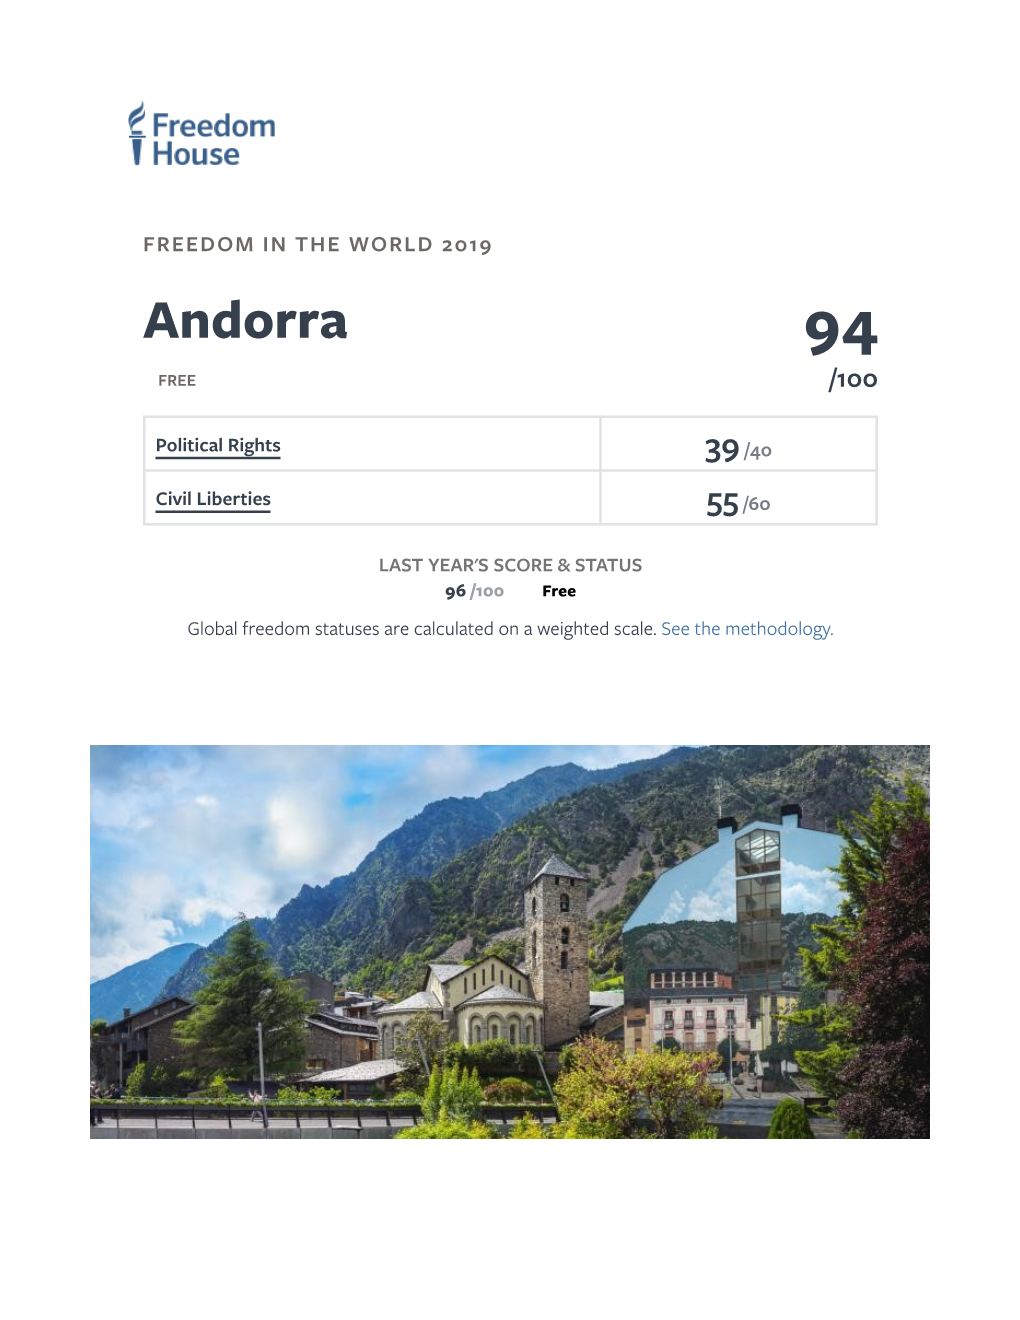 Andorra: Freedom in the World 2019 Country Report